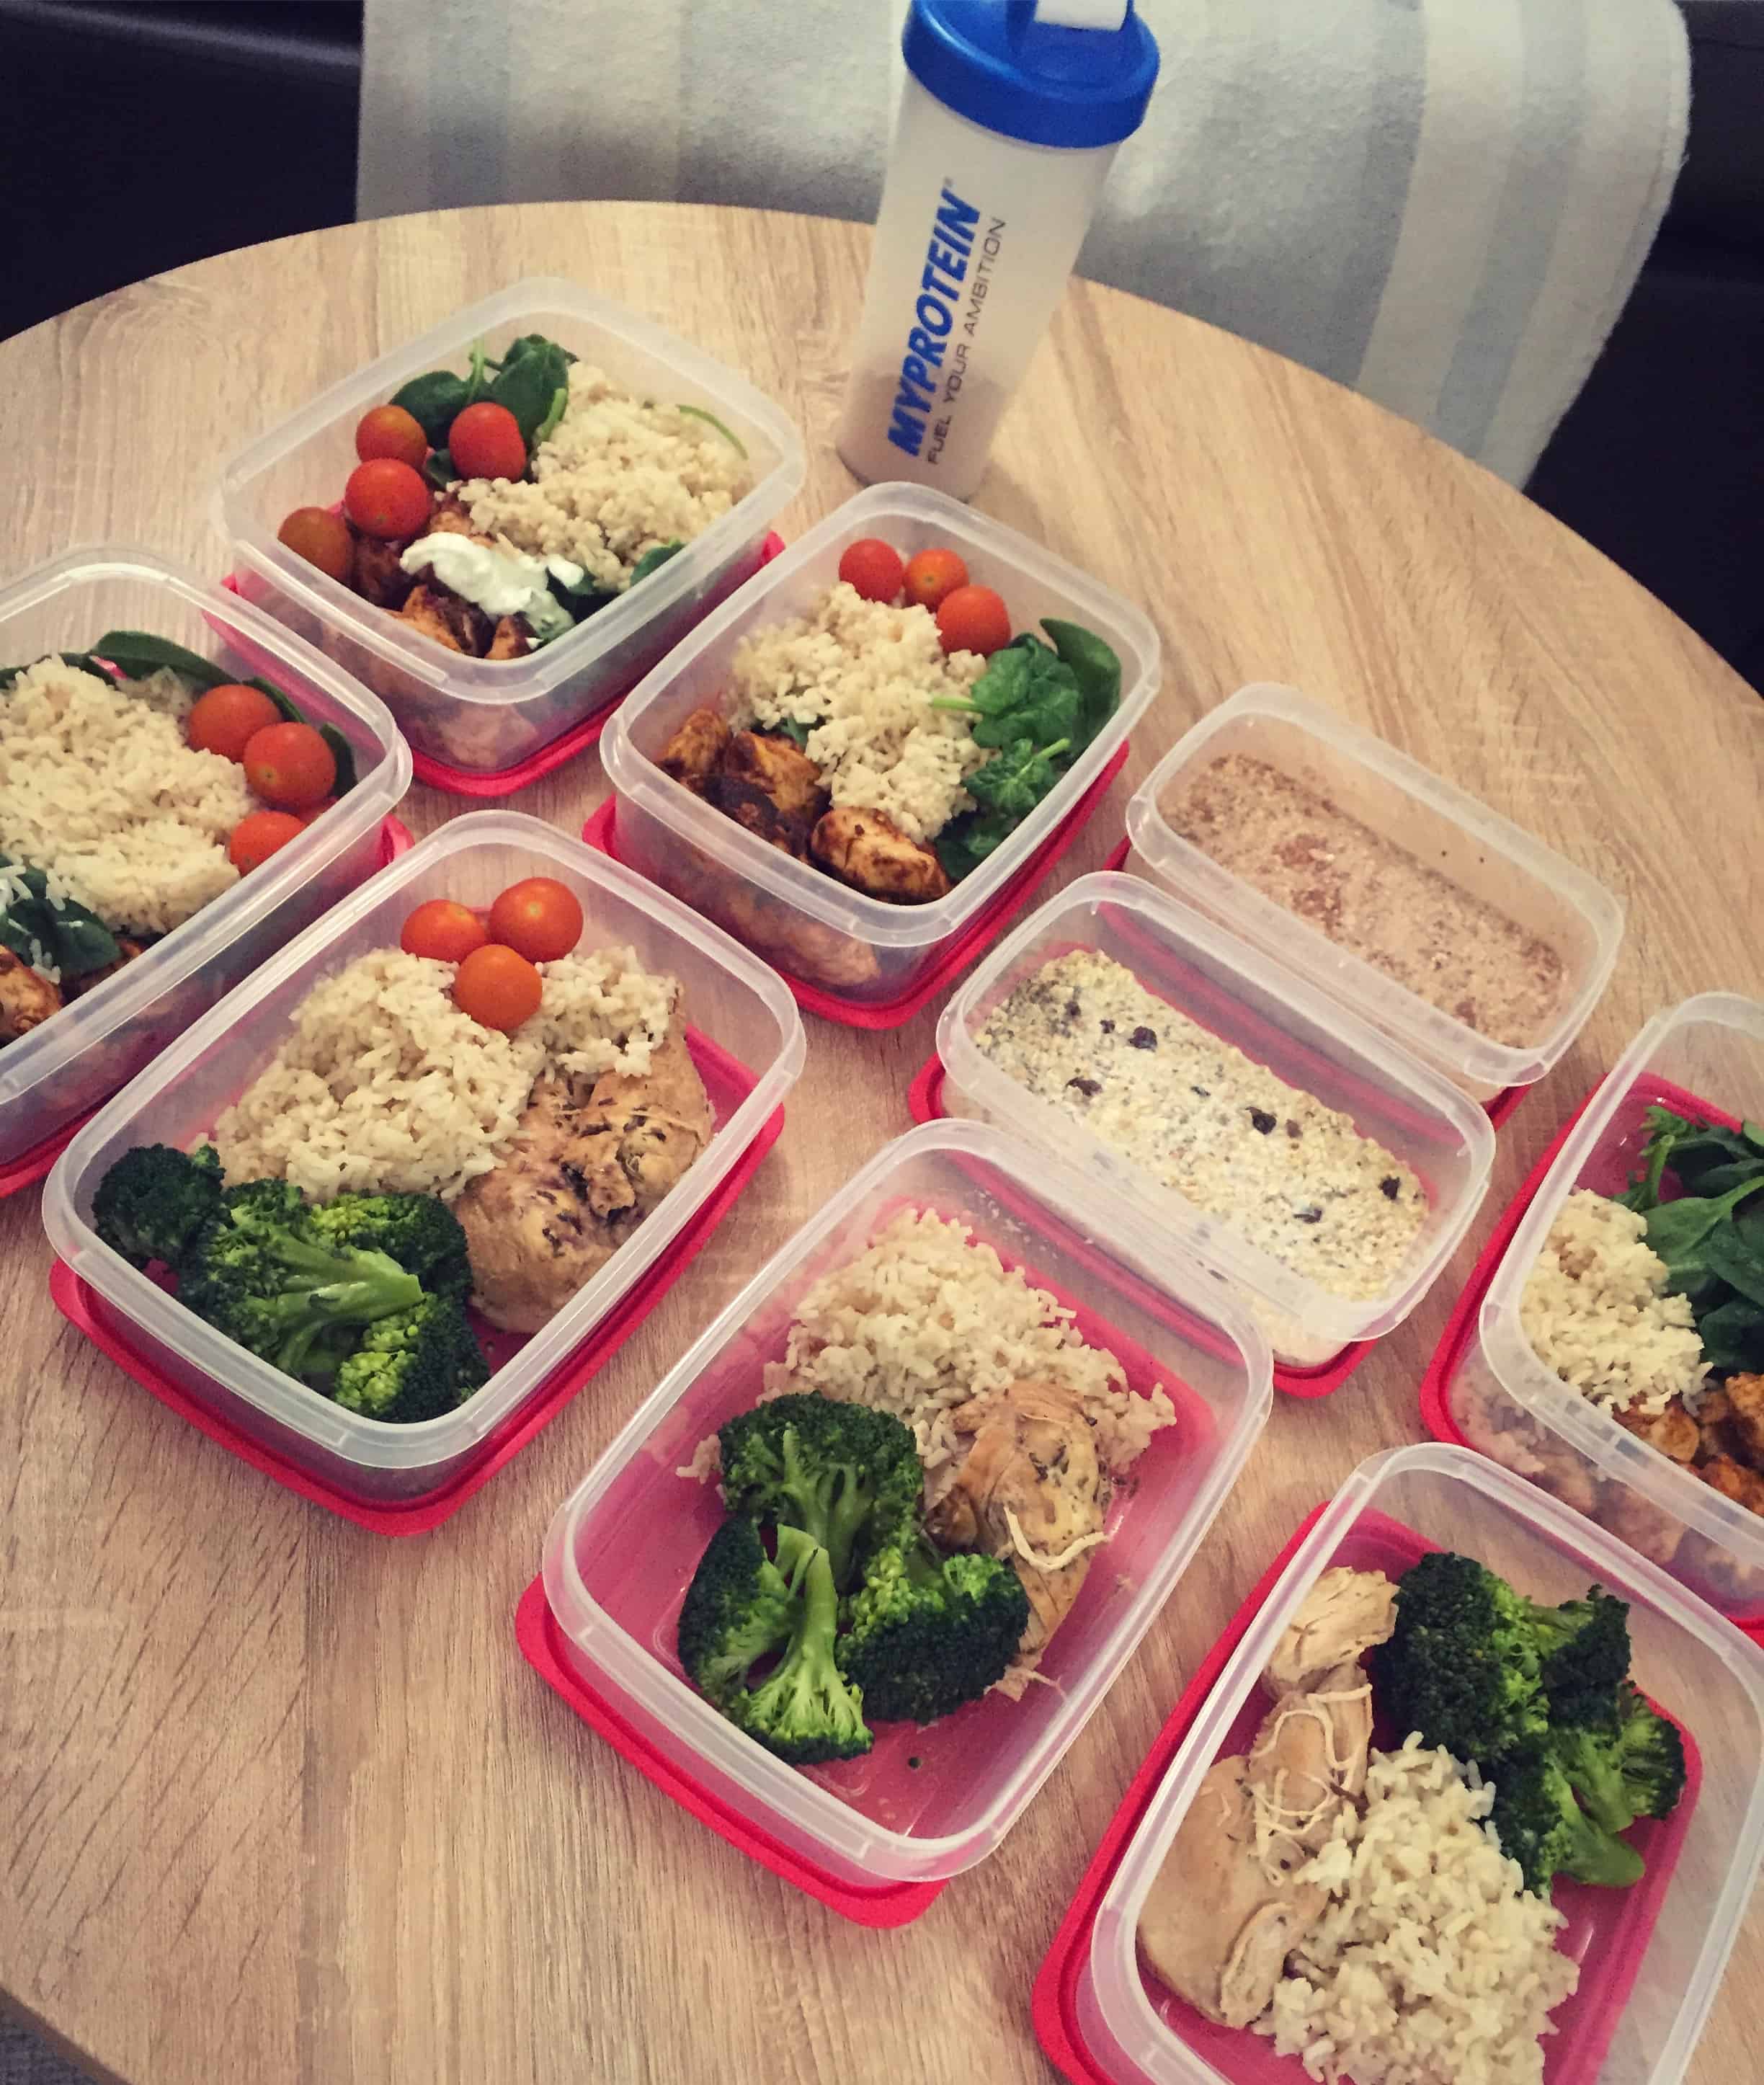 Meal Prep Is Improving My Nutrition and Saving Me Money